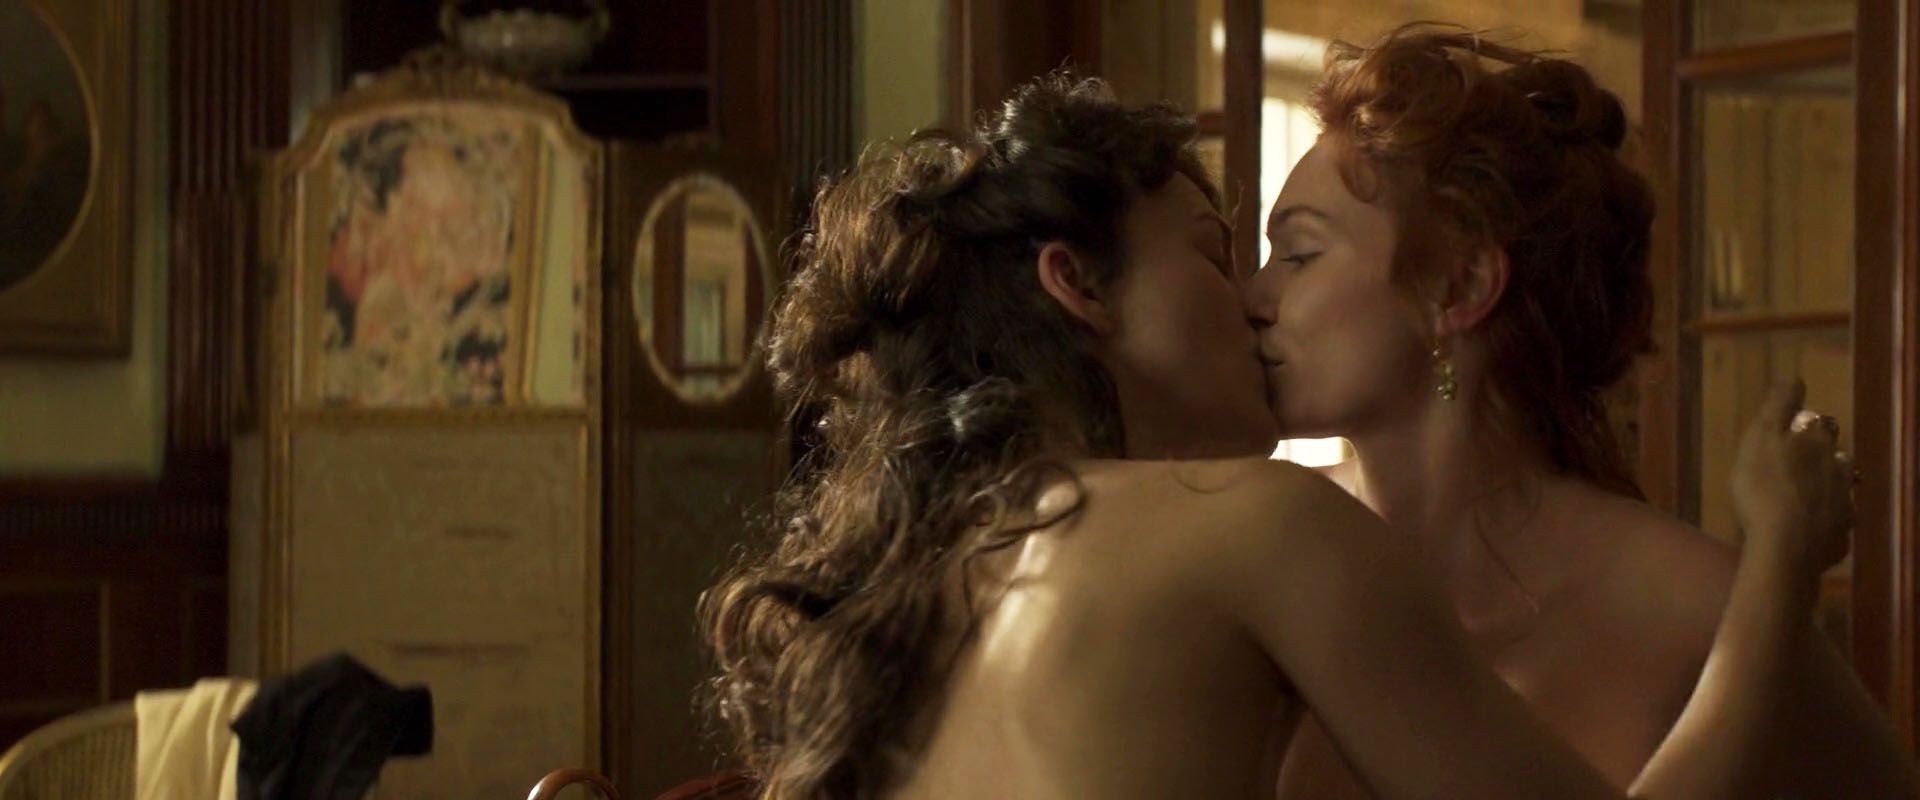 Keira Knightley and Eleanor Tomlinson Topless